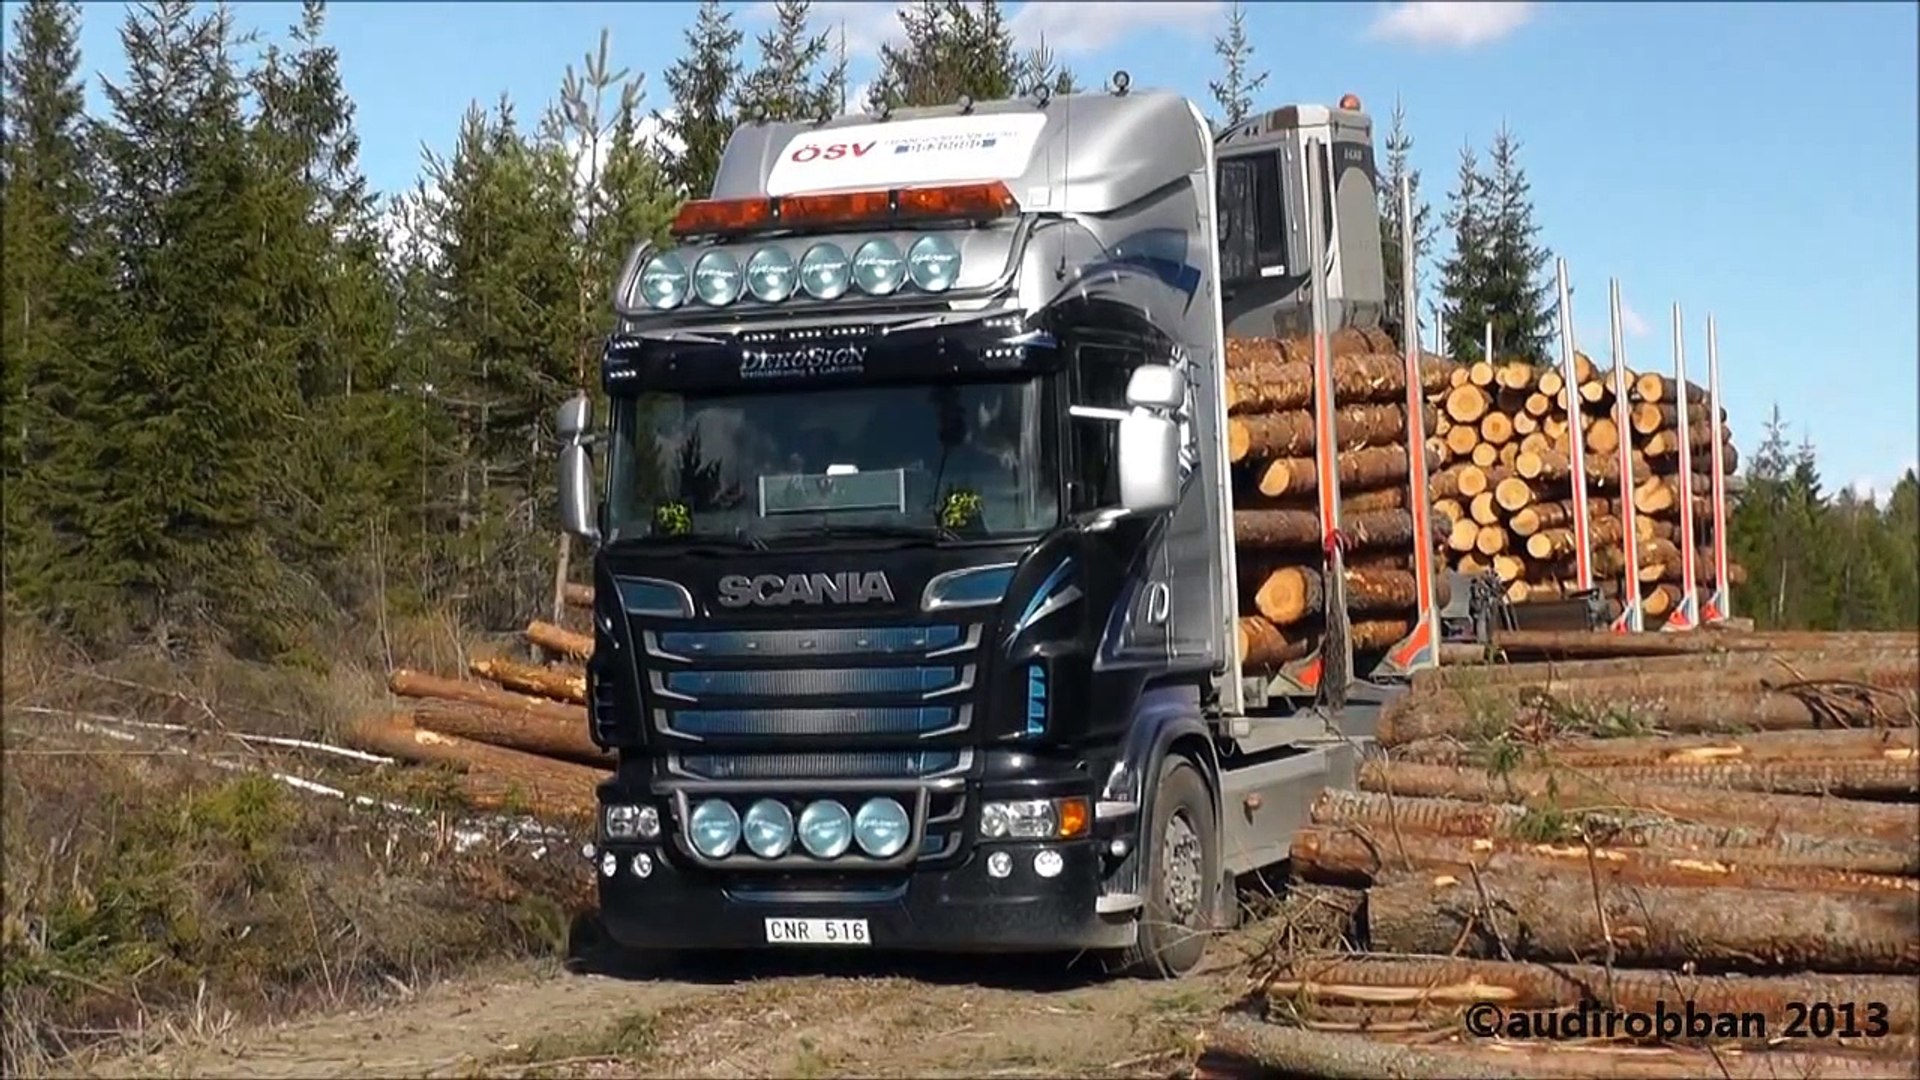 Scania R730 6x4 Timber Truck Loading - Dailymotion Video